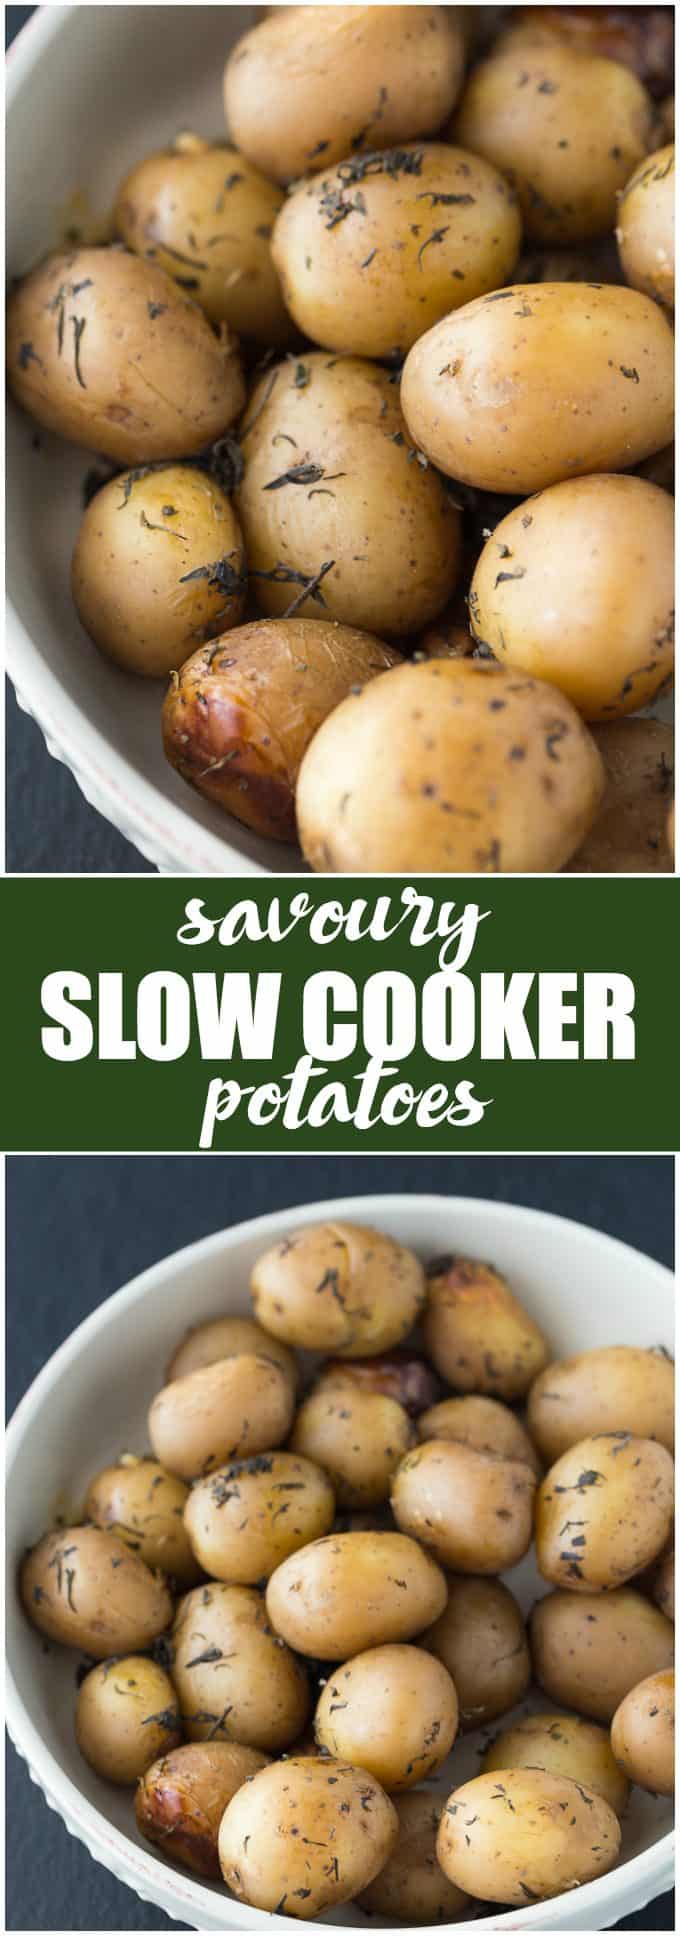 Savory Slow Cooker Potatoes - The easiest Crockpot side dish! You only need 5 ingredients to make the most tender potatoes filled with savory garlic flavor.